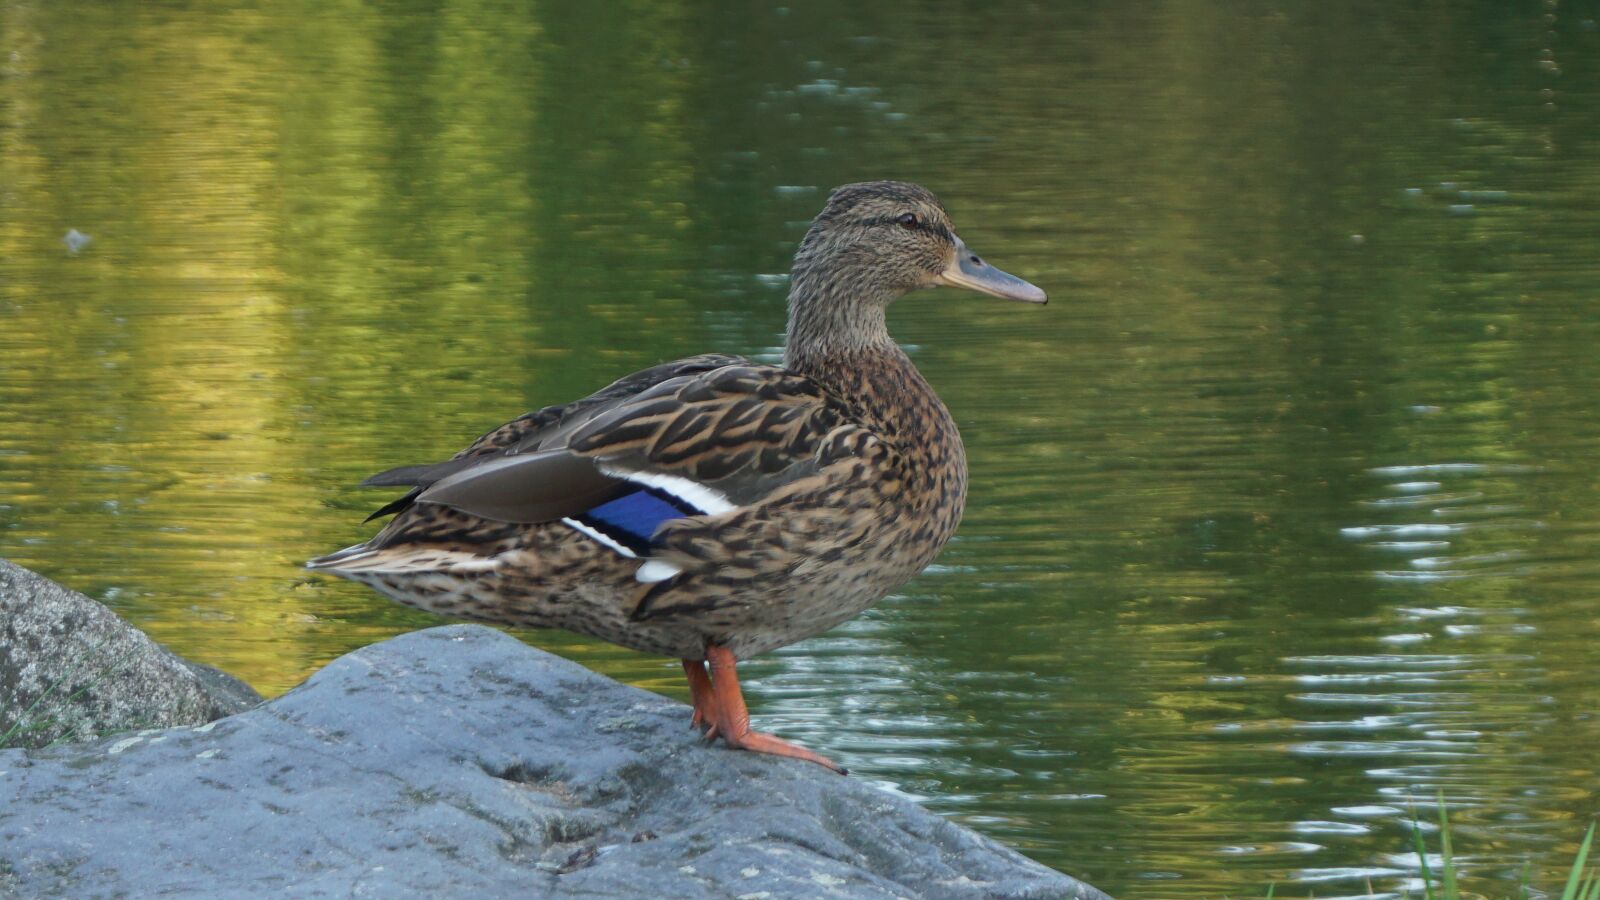 Sony a6000 sample photo. Duck, lake, water photography